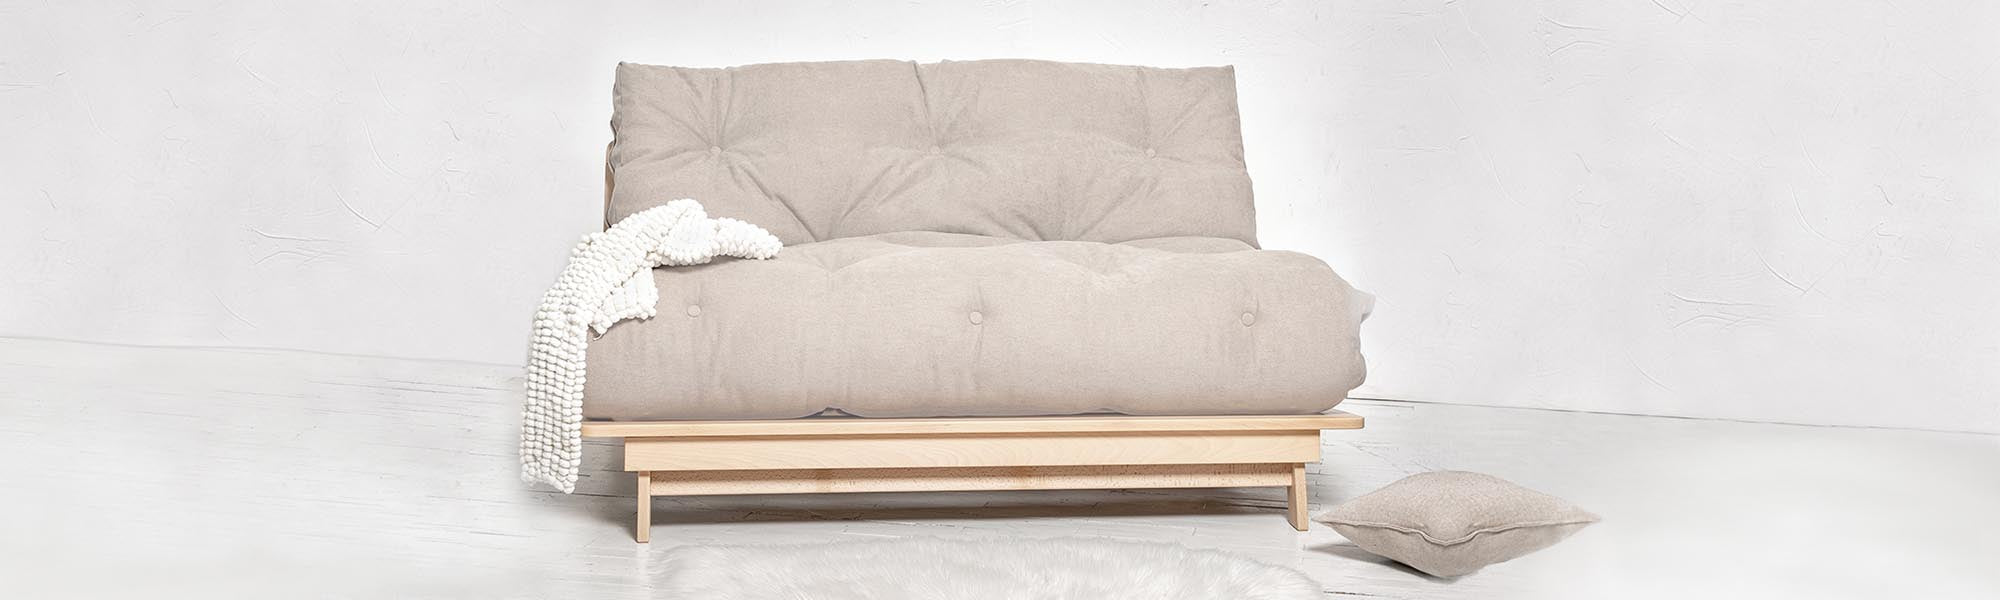 Double seats futon on a wooden frame with a beige mattress